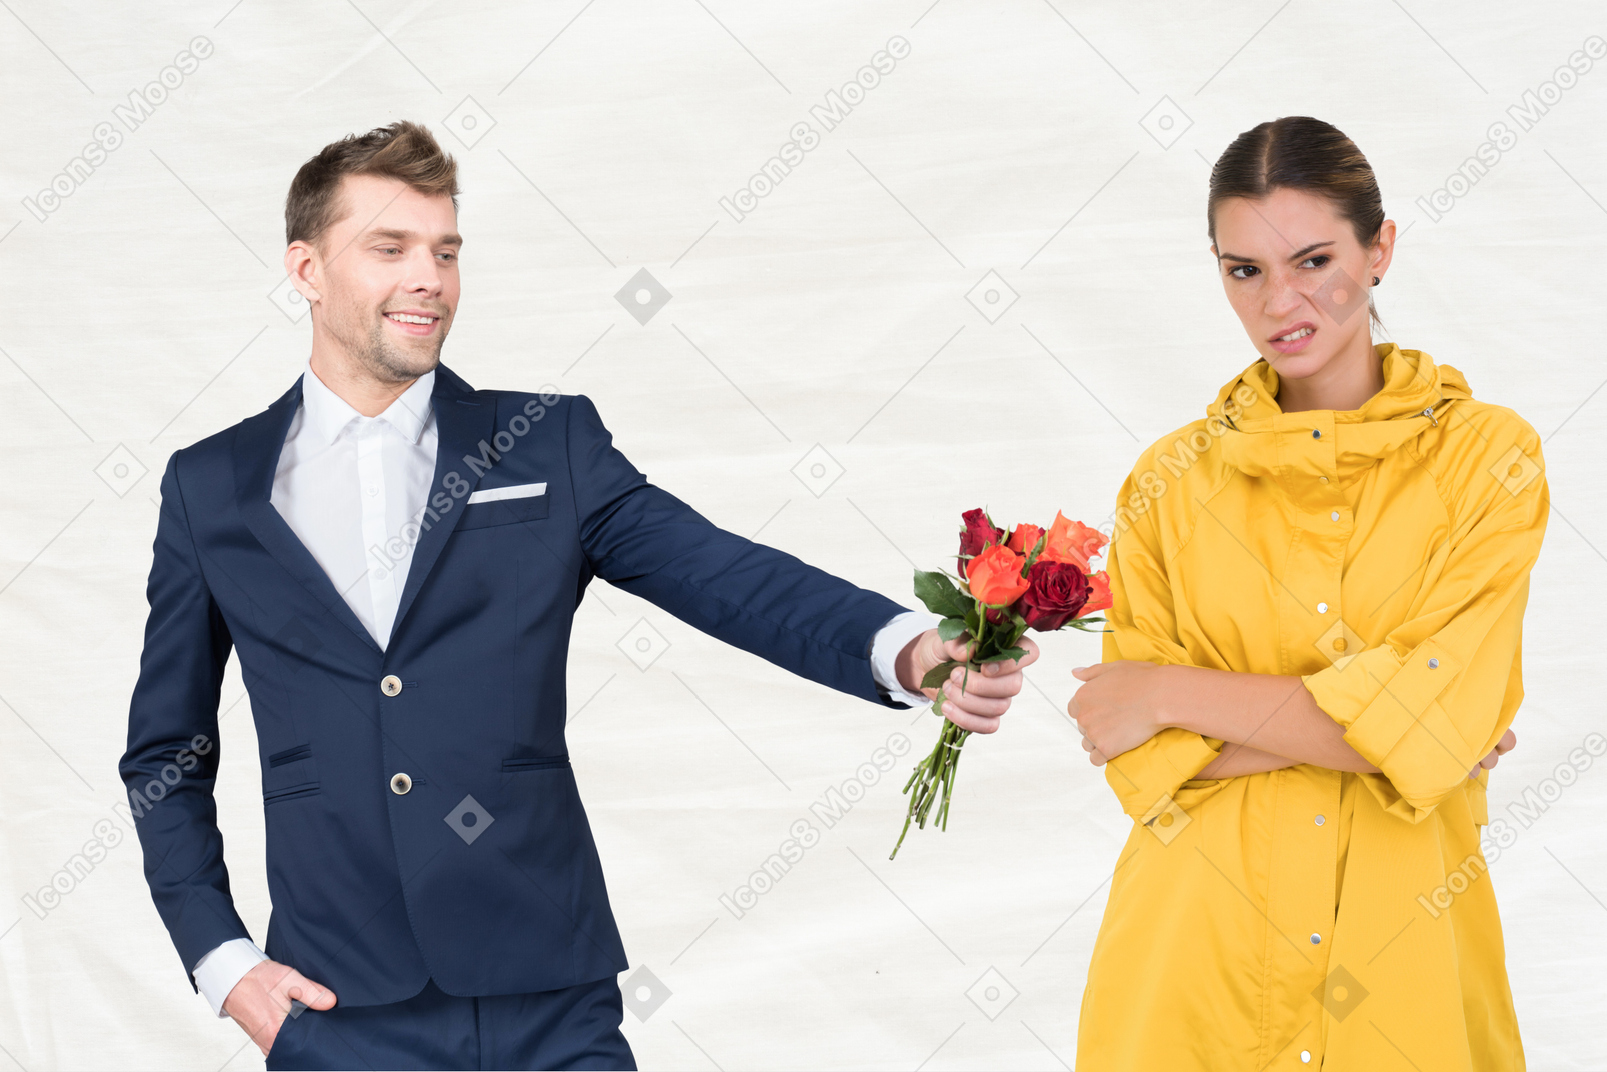 Man giving a bouquet of flowers to his girlfriend